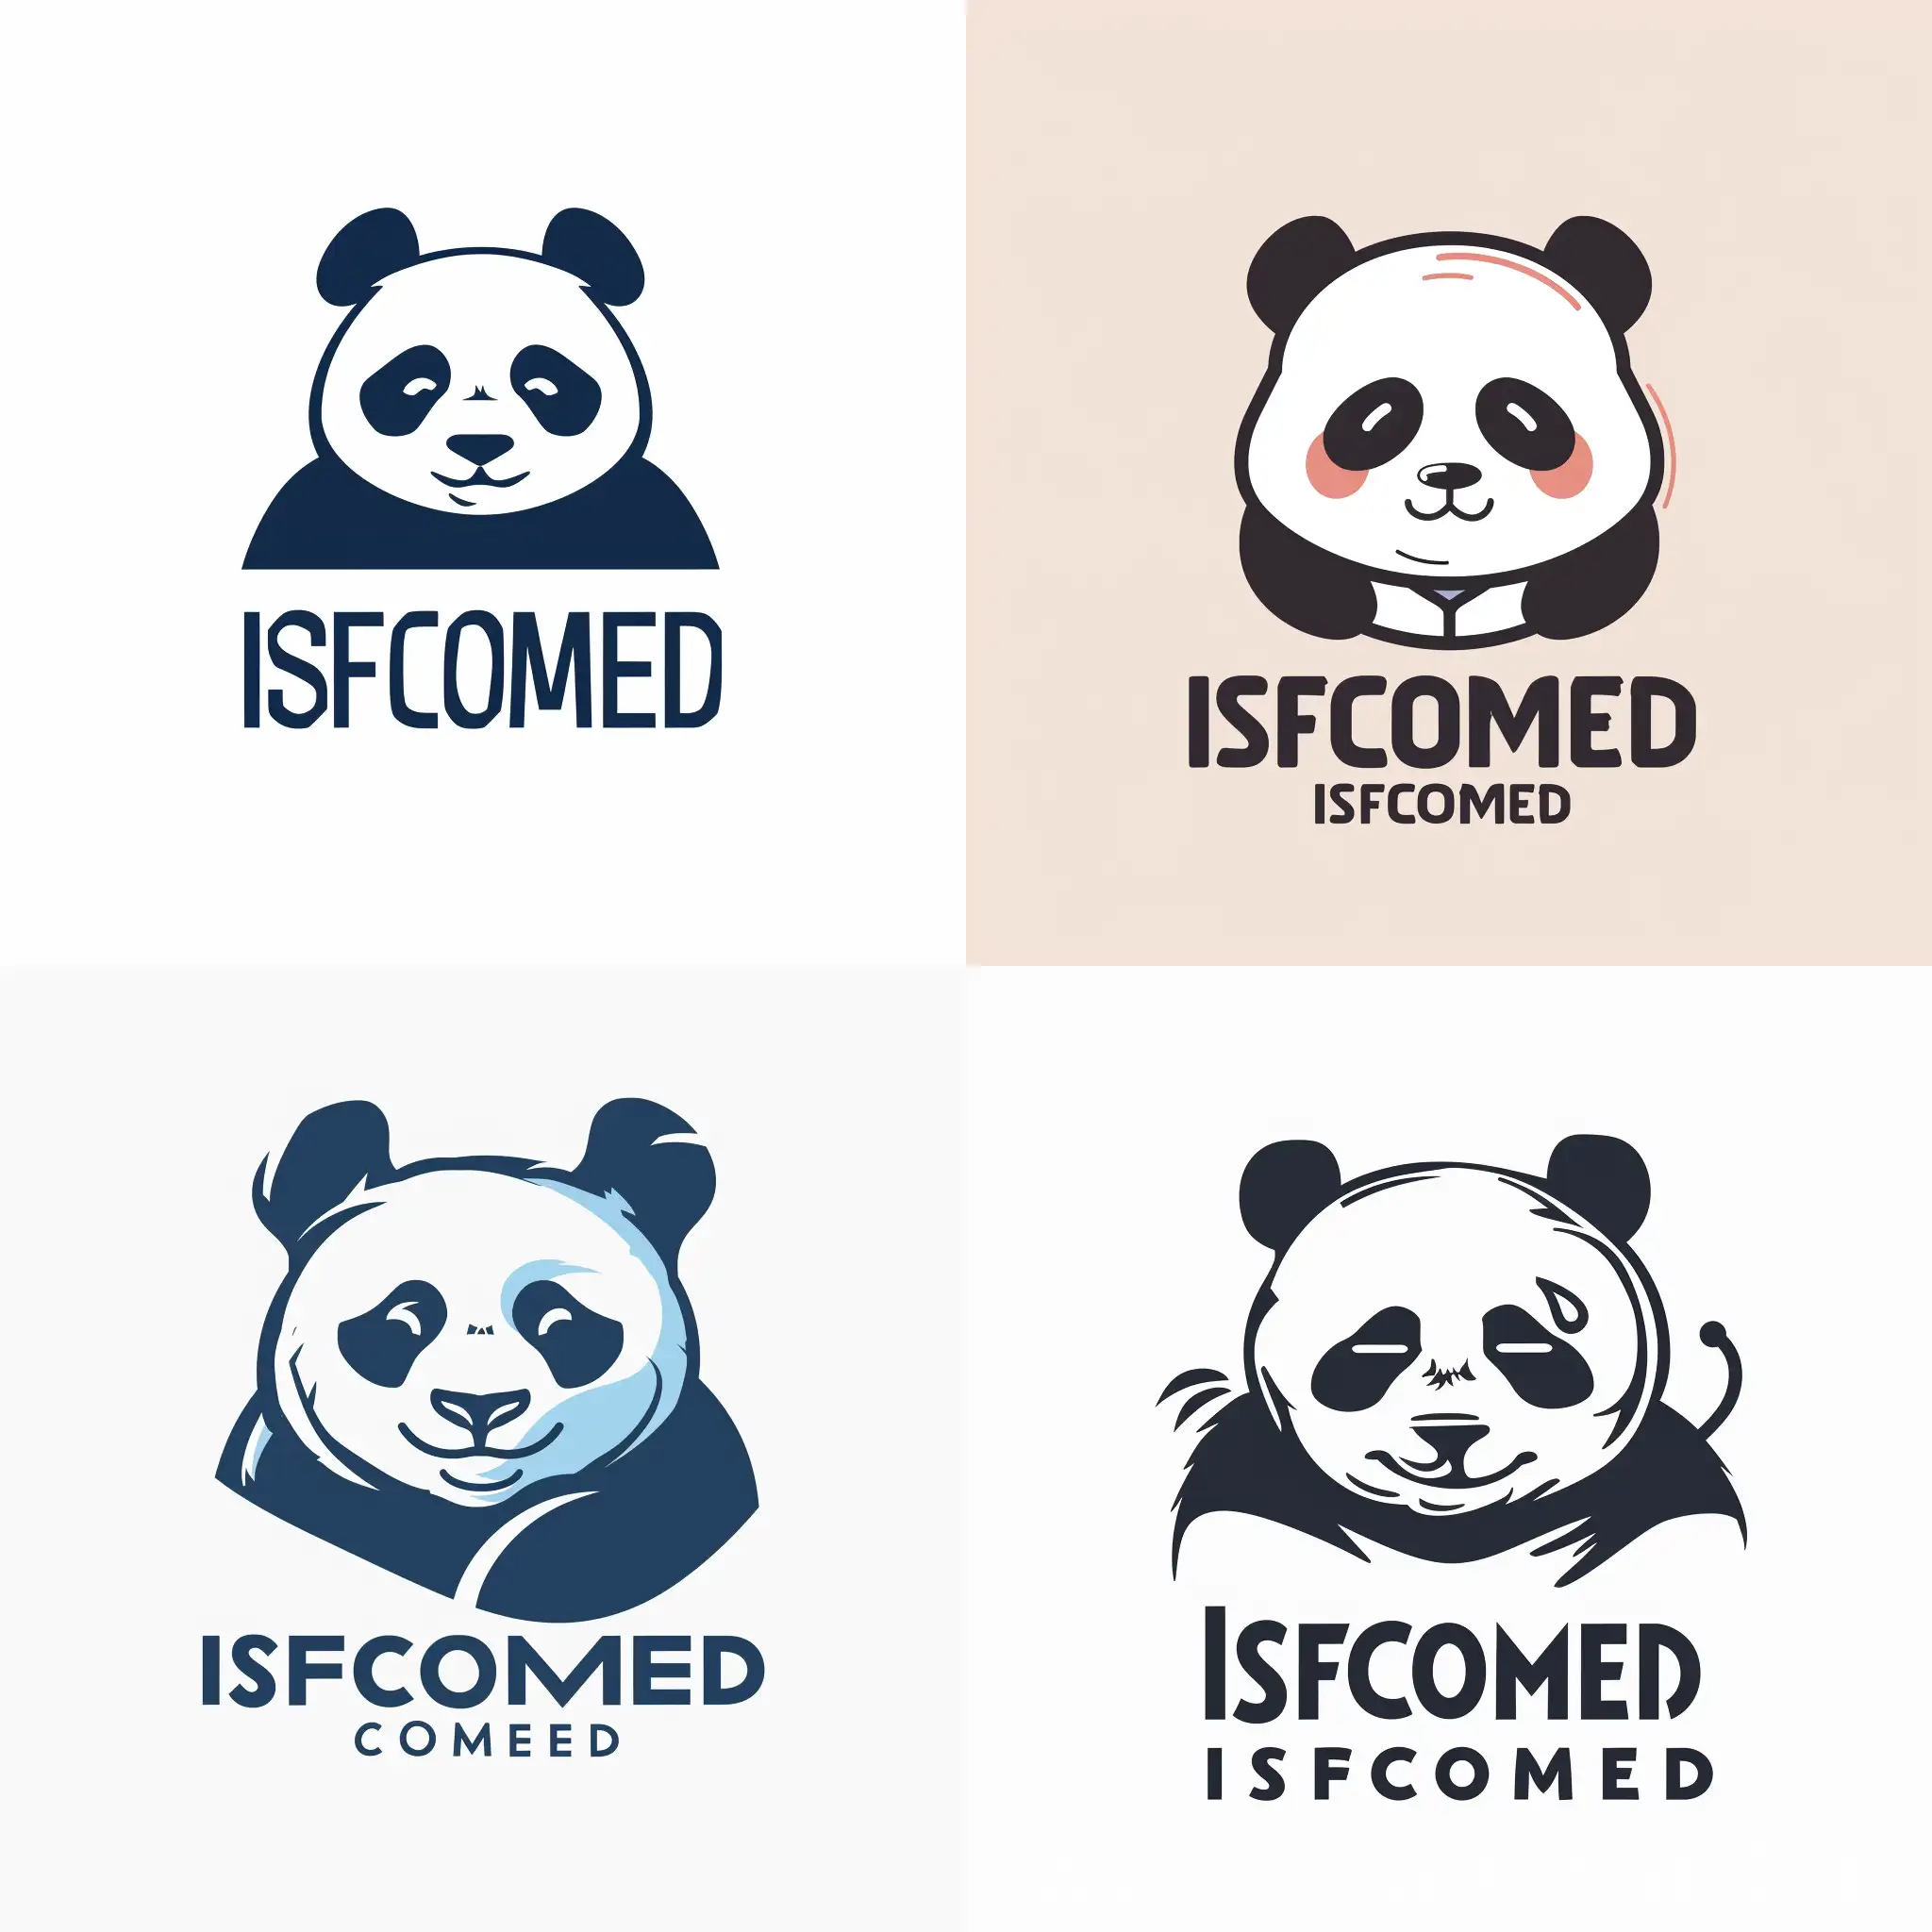 Doctor-Panda-Logo-for-Medical-Education-ISFCOMED